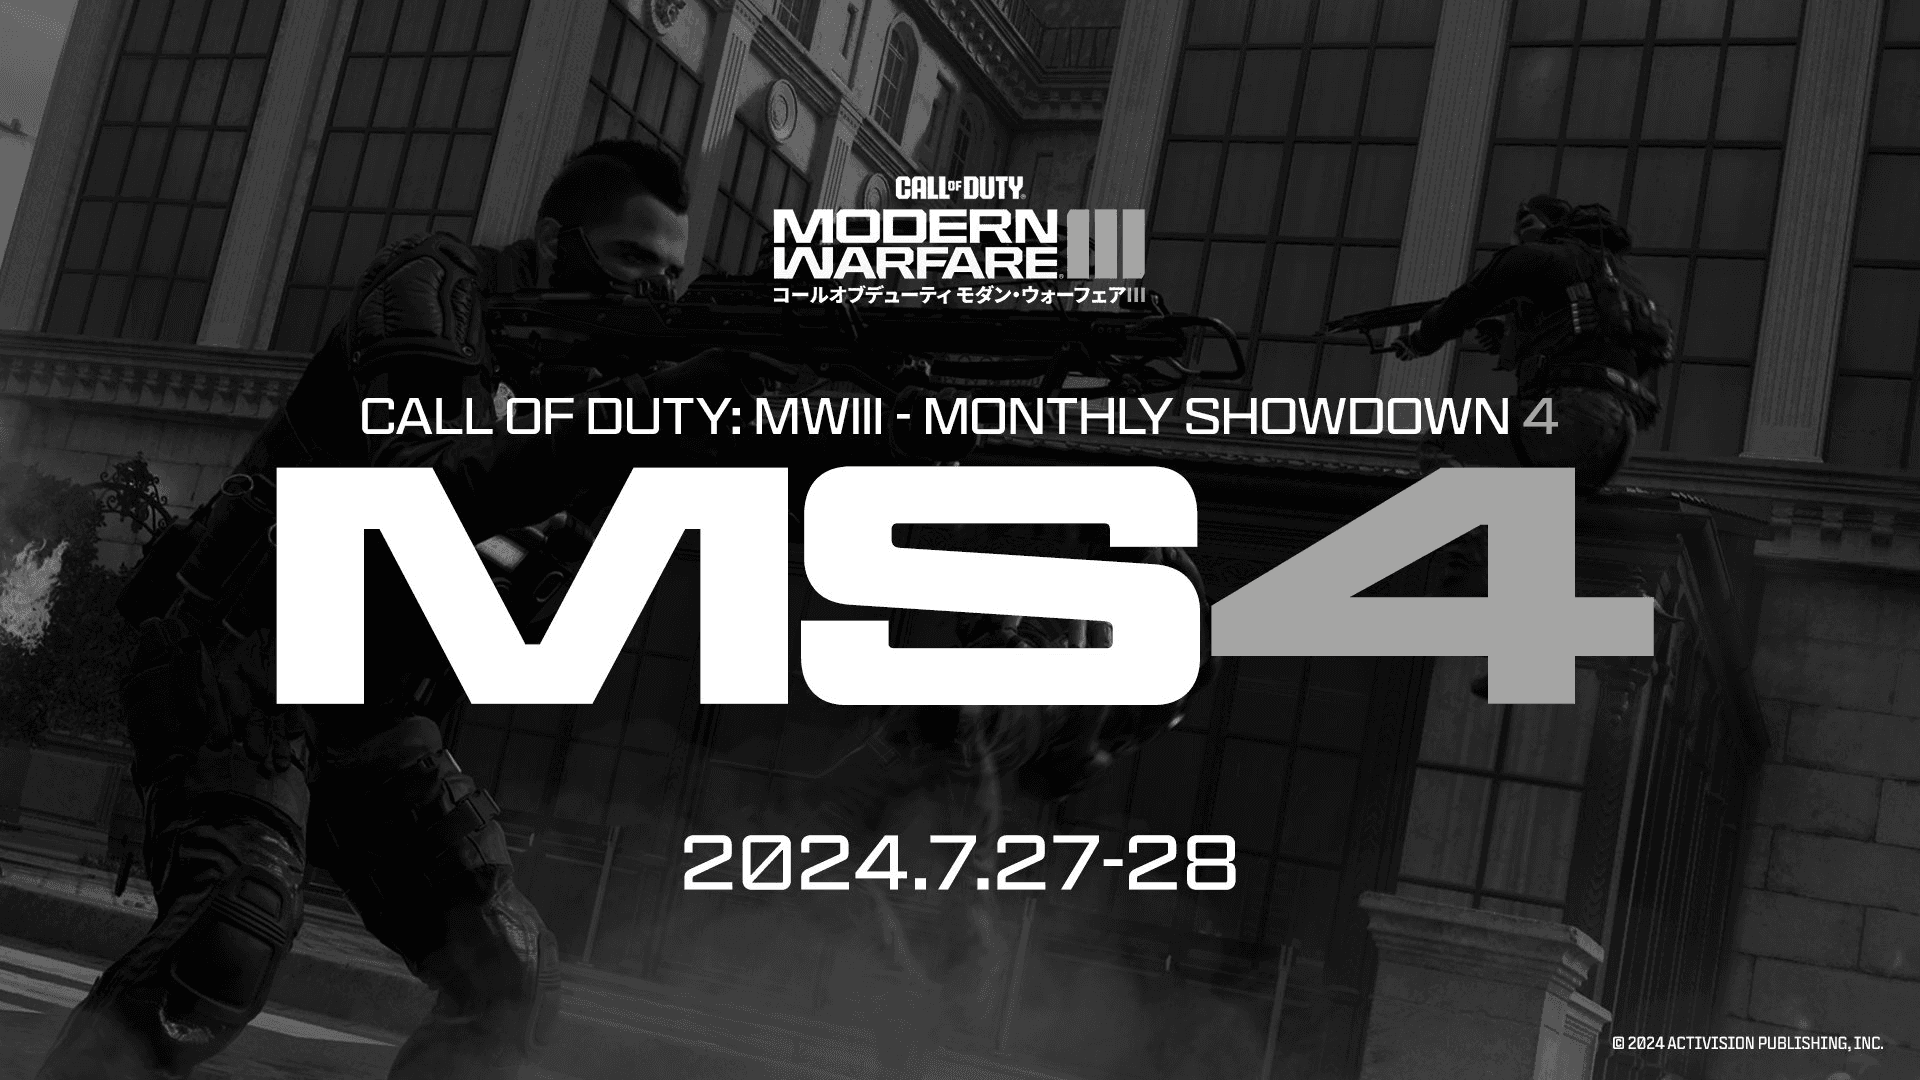 MWIII Monthly Showdown 4 feature image